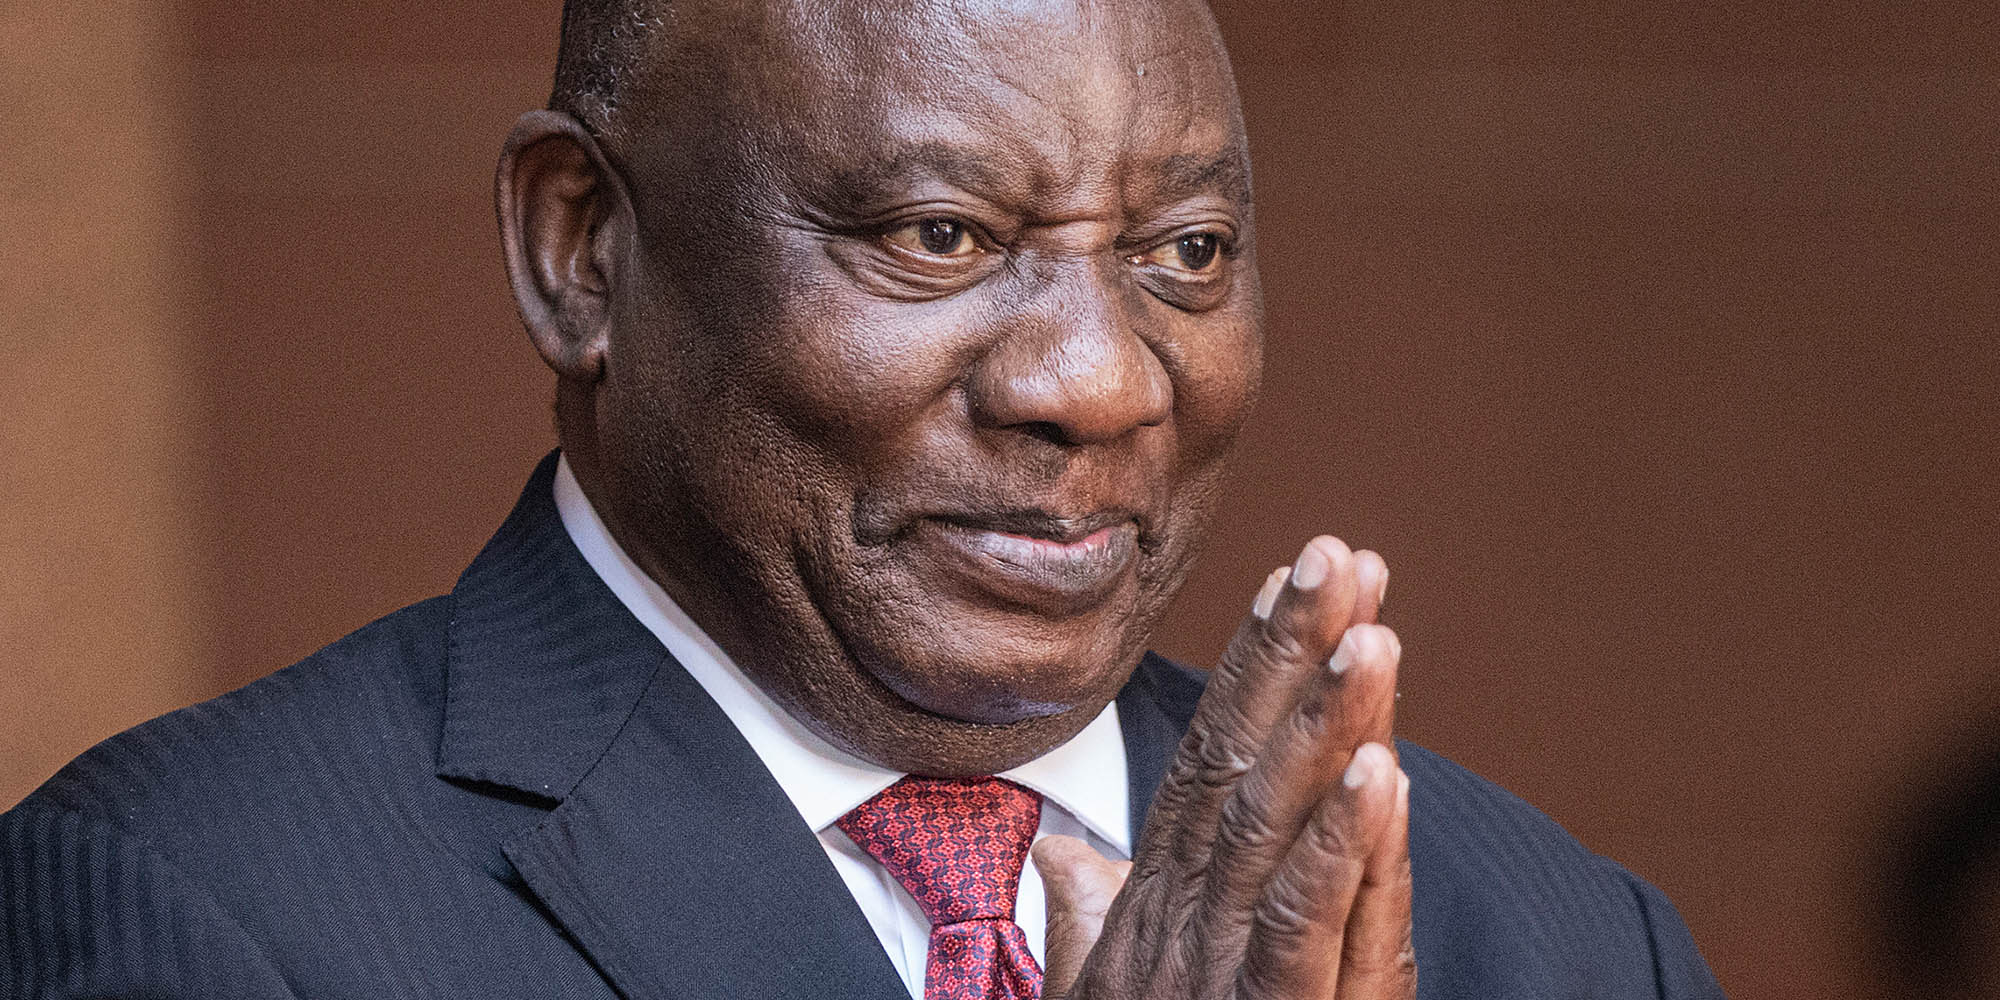 Staying in power at any cost — Ramaphosa’s pivot to populism